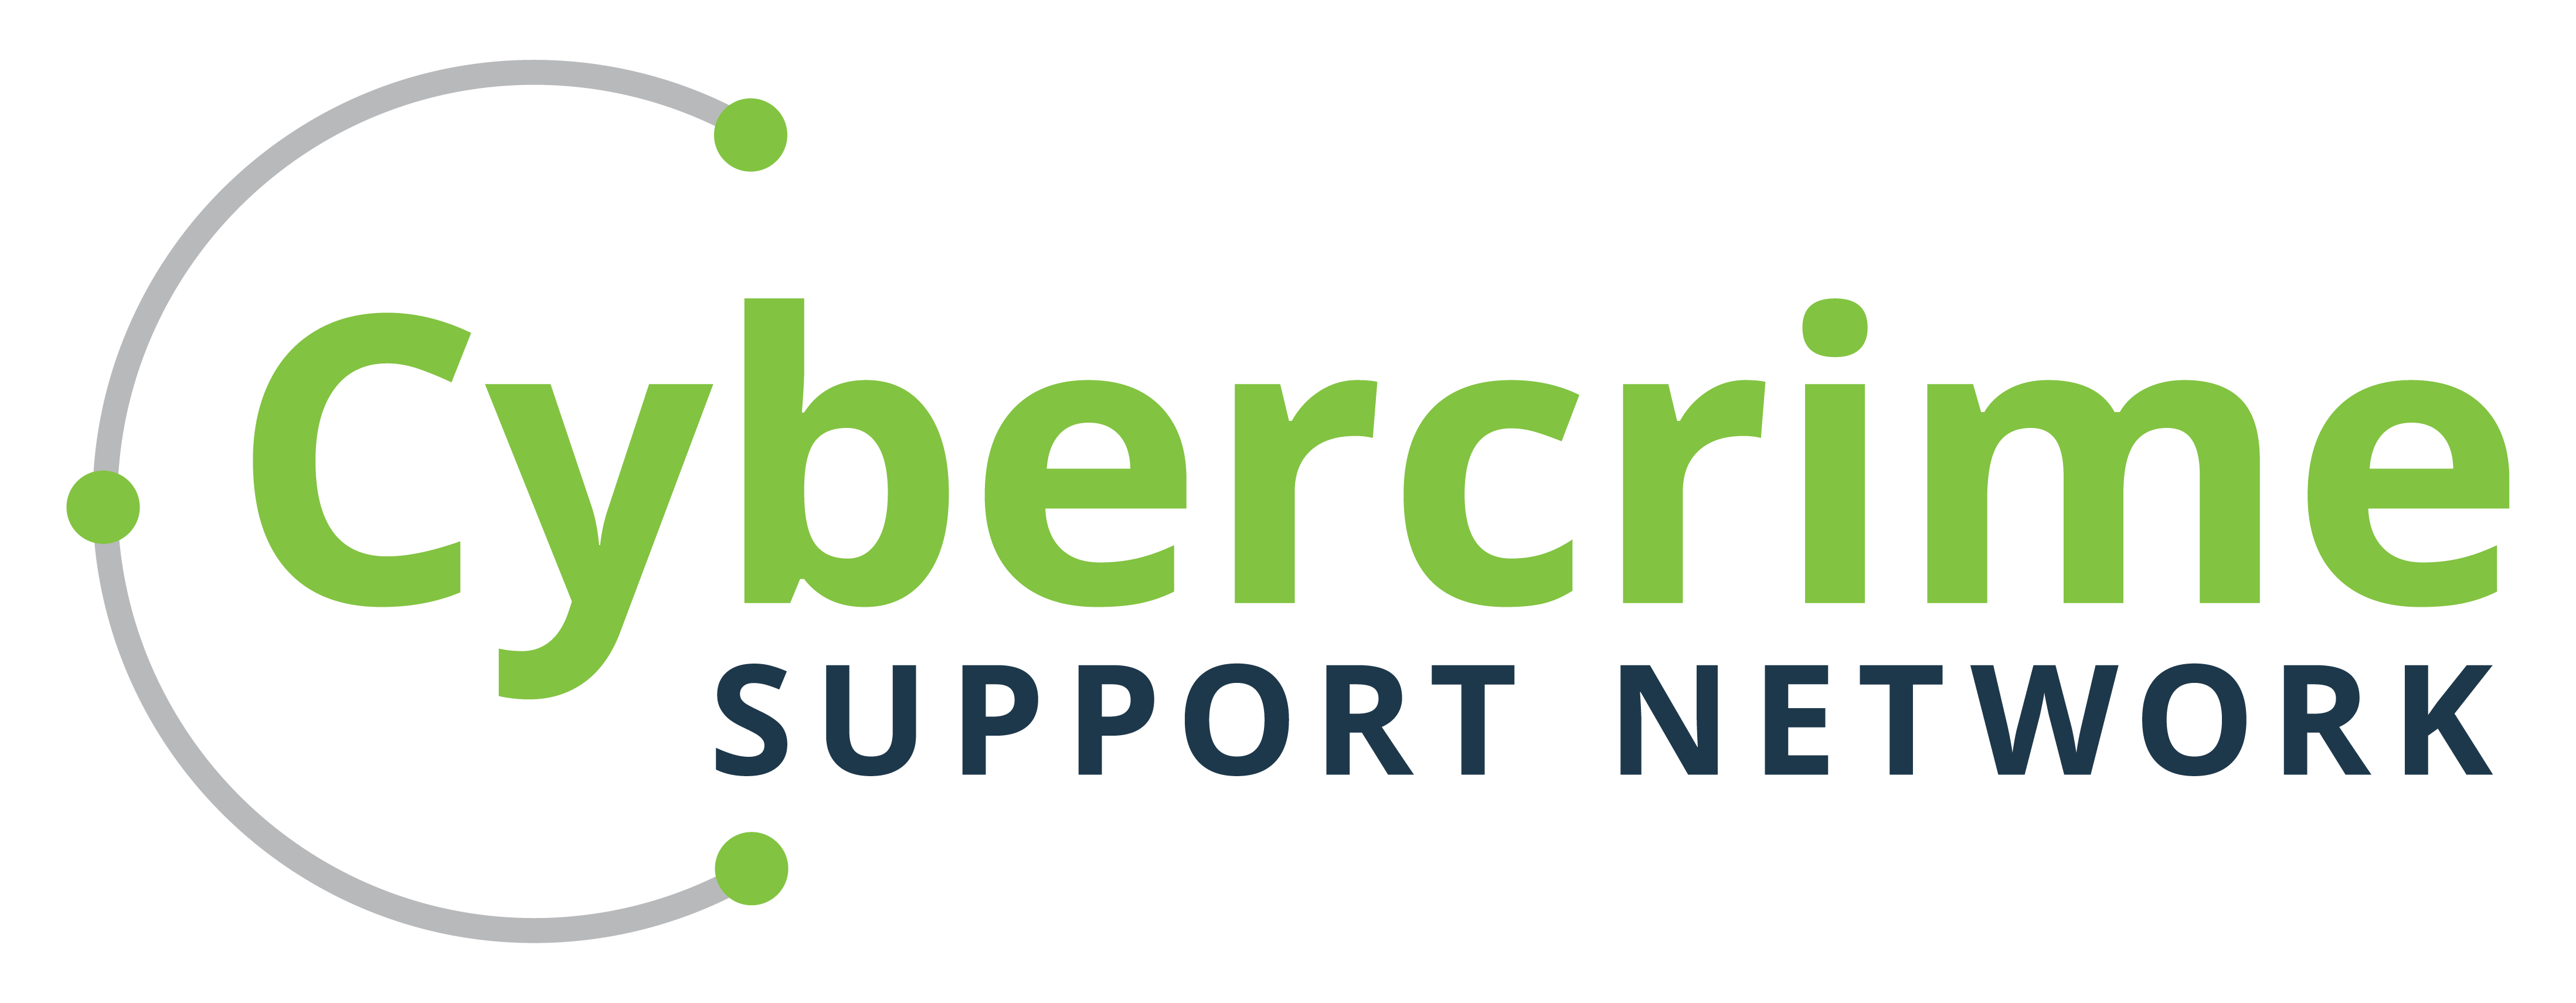 Cybercrime Support Network